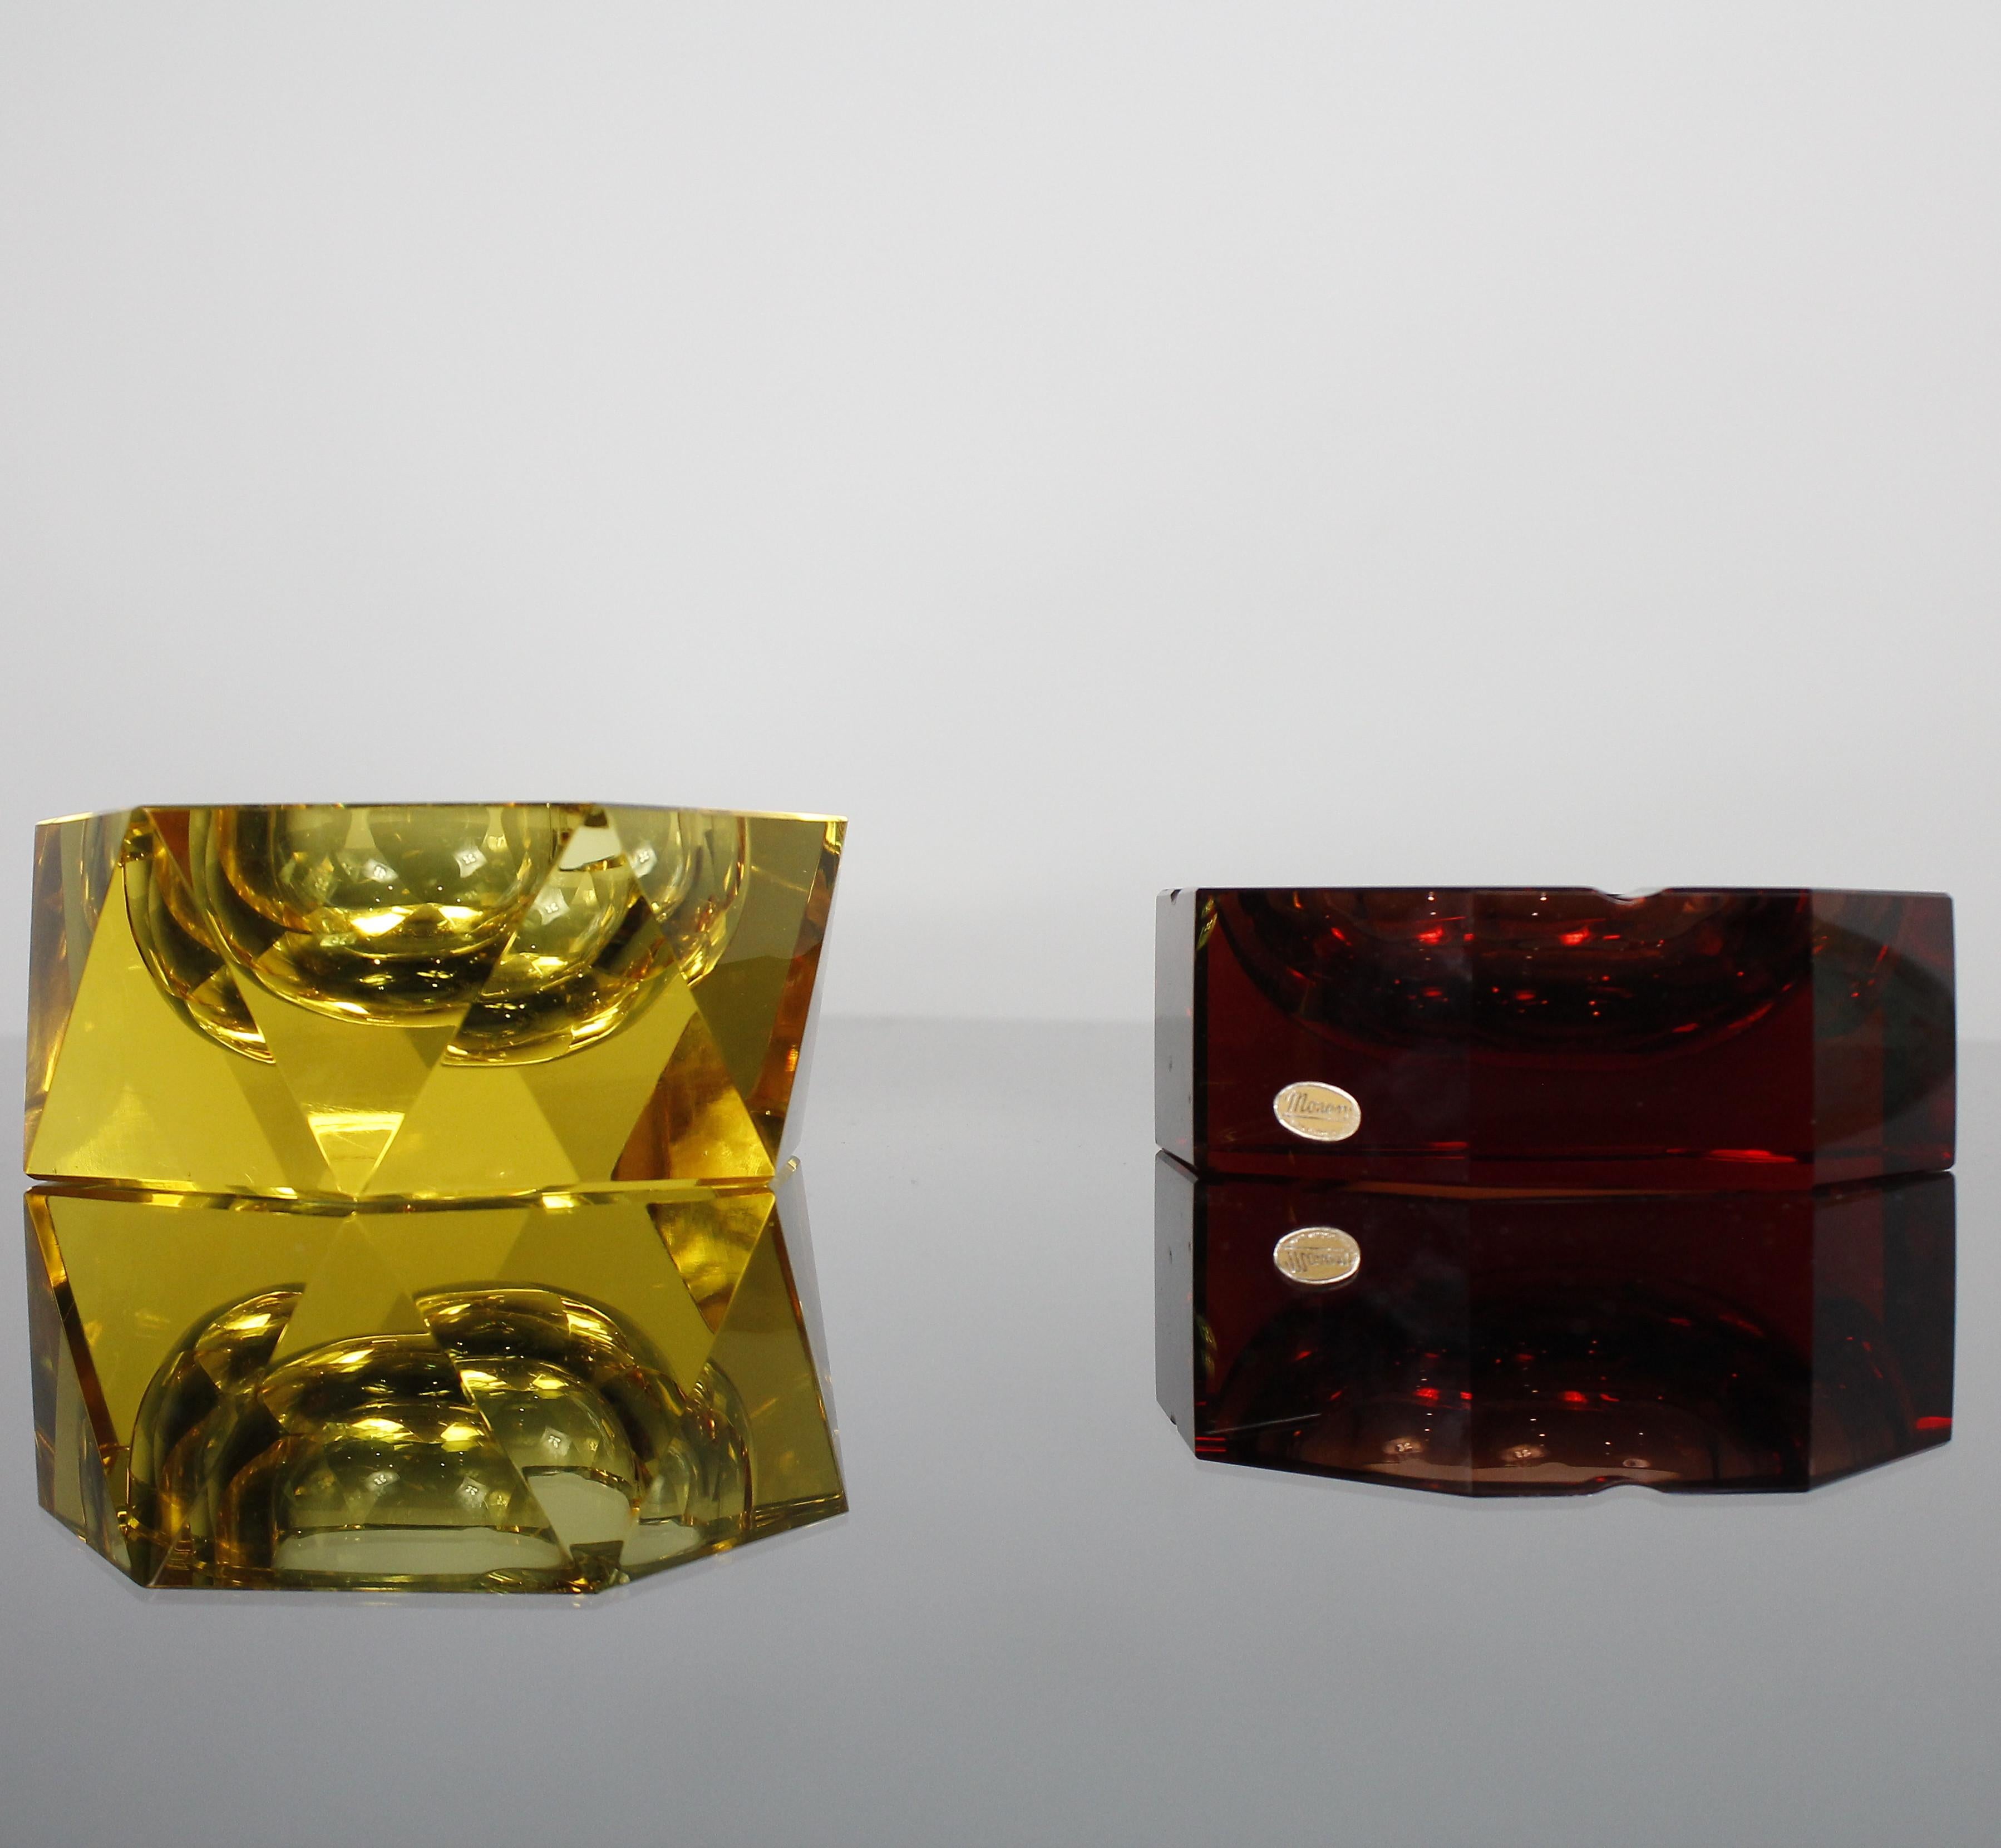 Pair of refined Moser Art Deco handcut glass ashtrays in very fine and intense colors, amber and yellow by Moser, circa 1940.

They are both signed but only the amber ashtray has the label too.

In excellent original condition.

Measurements